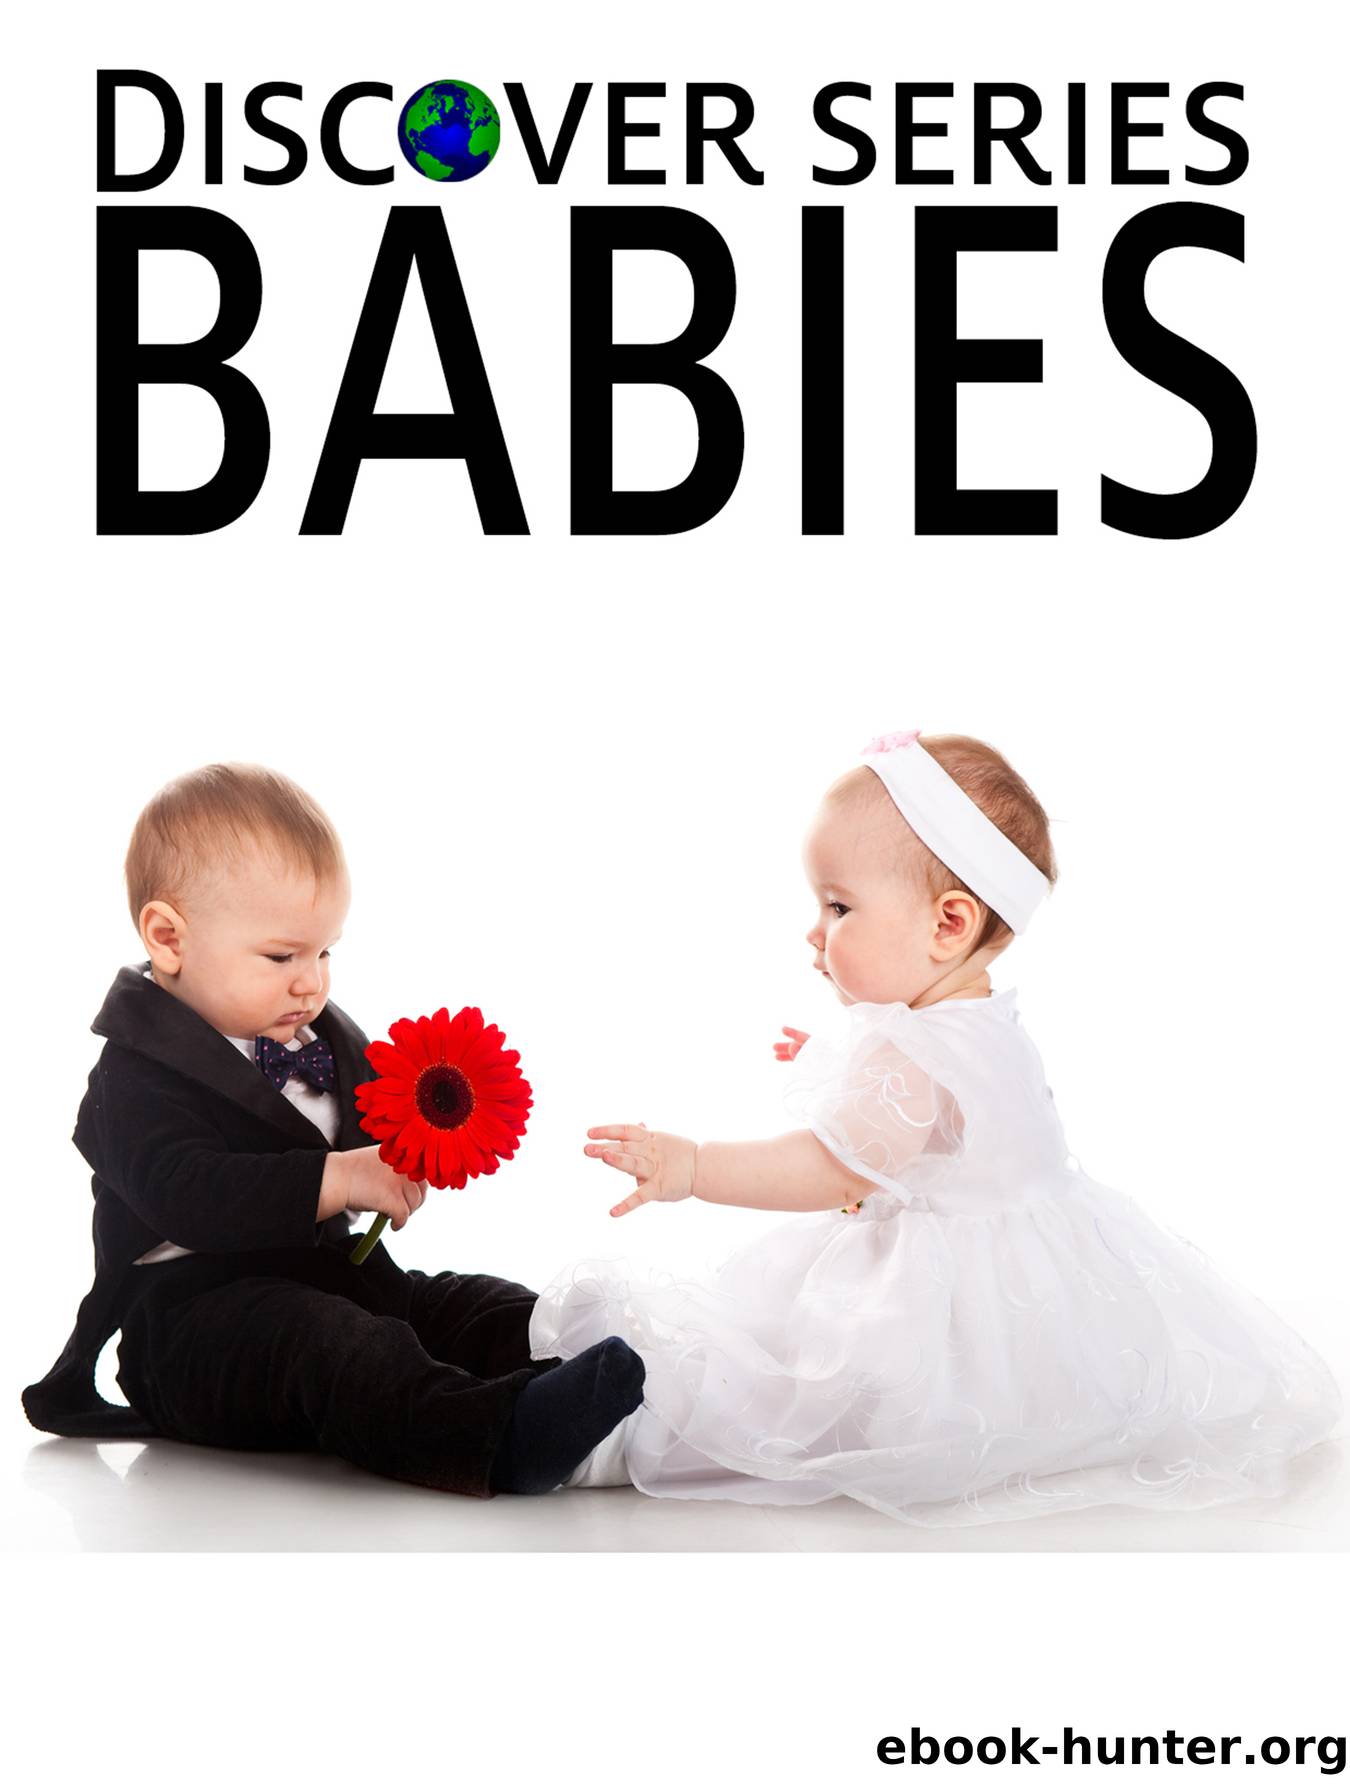 Babies by Xist Publishing